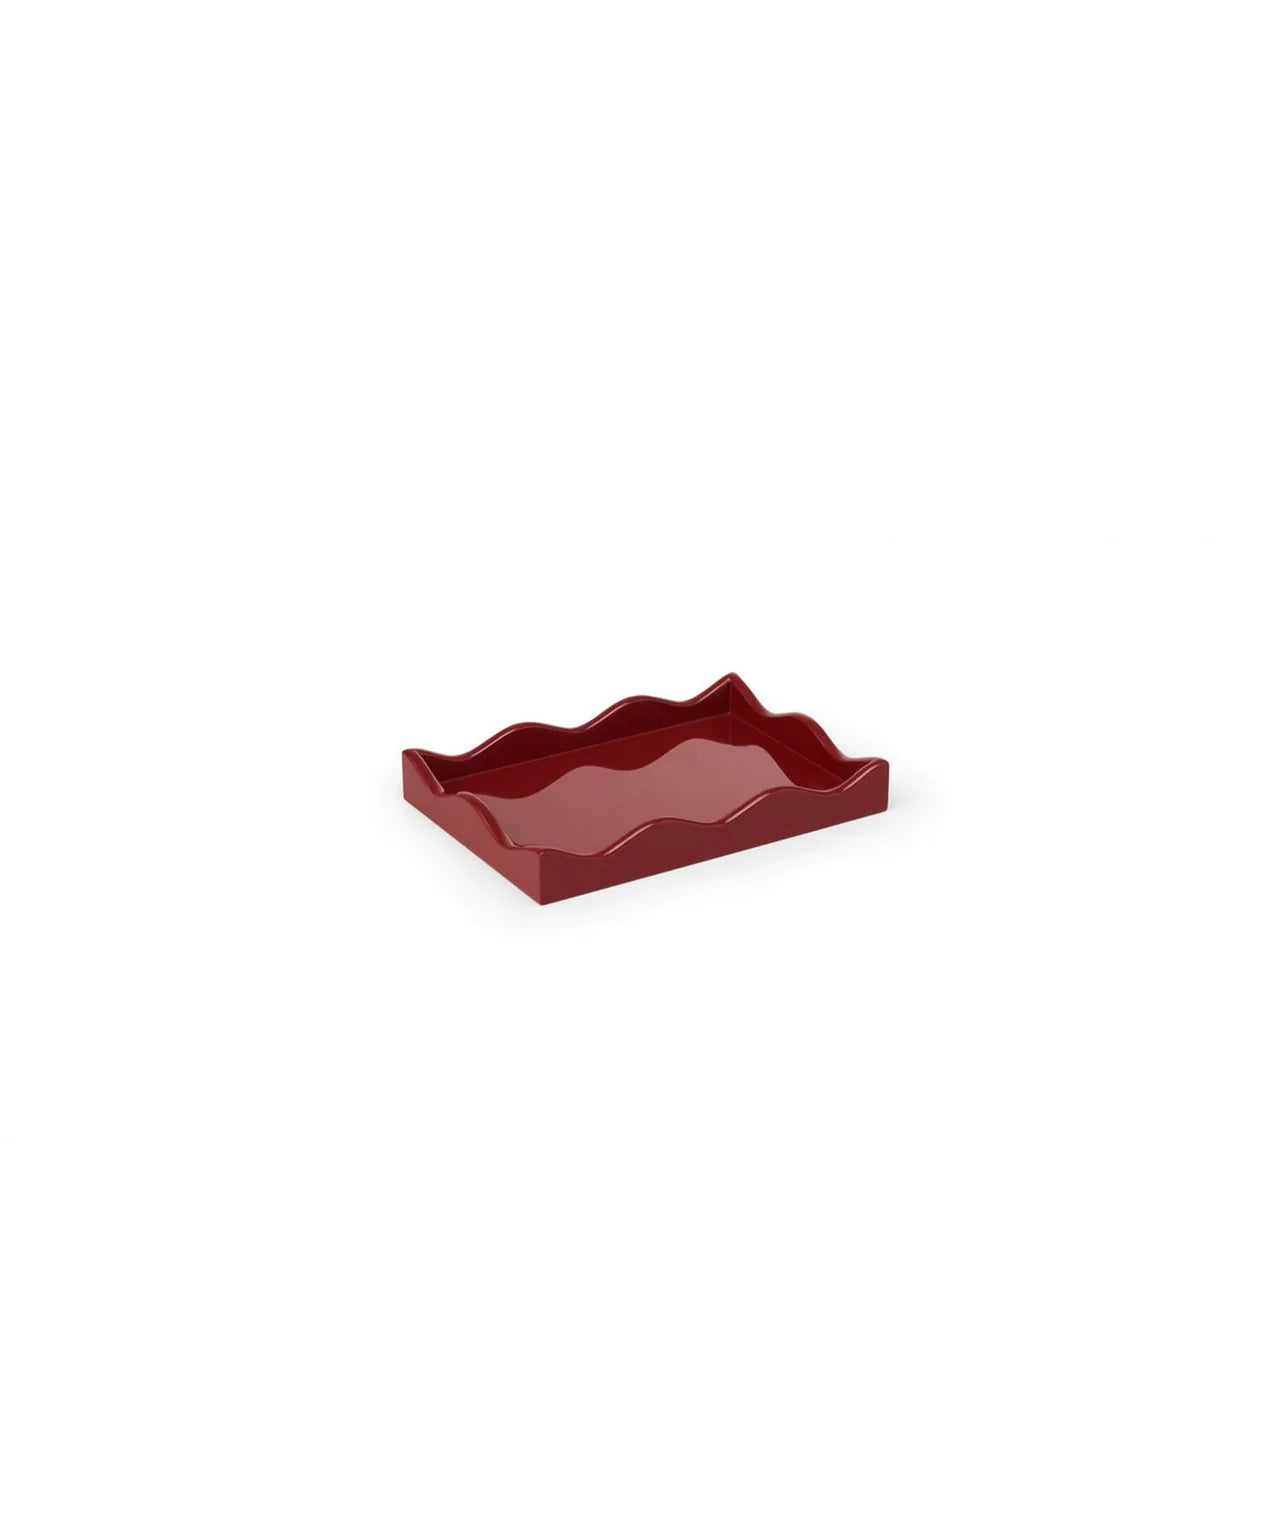 The Lacquer Company Mini Belles Rives Tray in Bordeaux Red